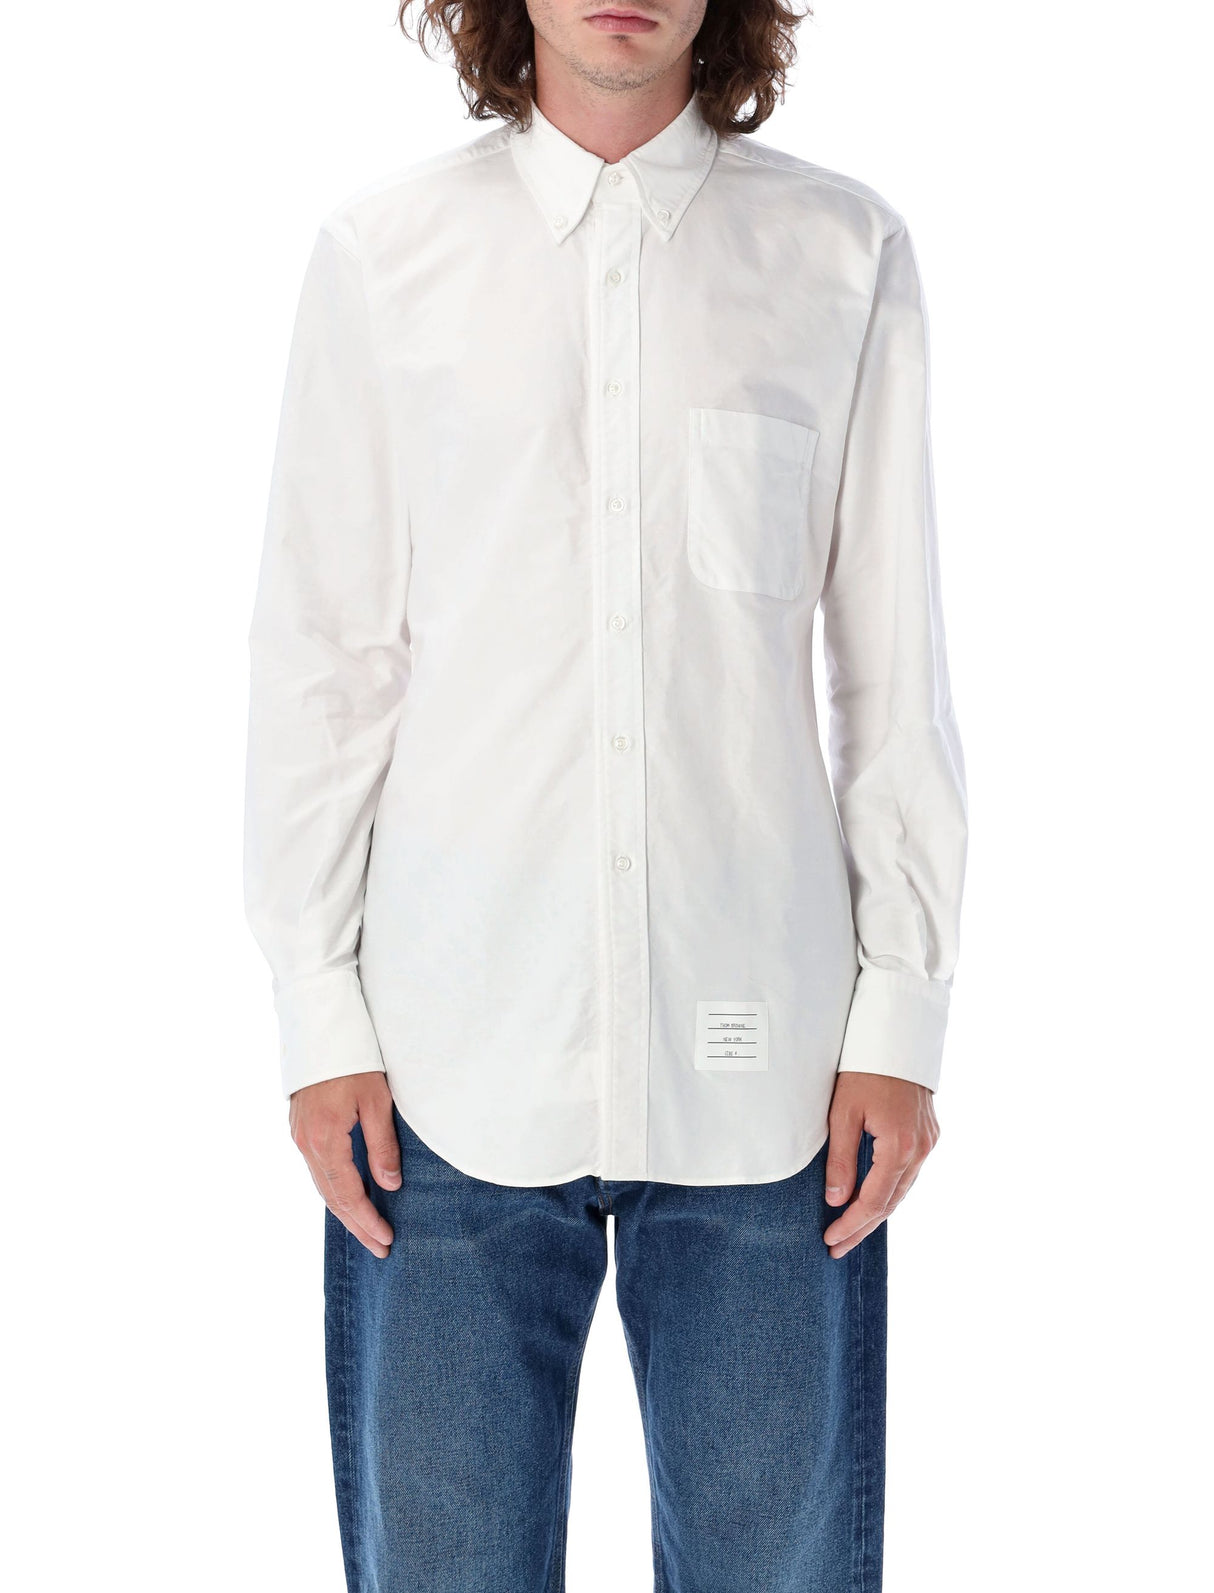 THOM BROWNE CLASSIC FIT SHIRT WITH GROSGRAIN PLACKET